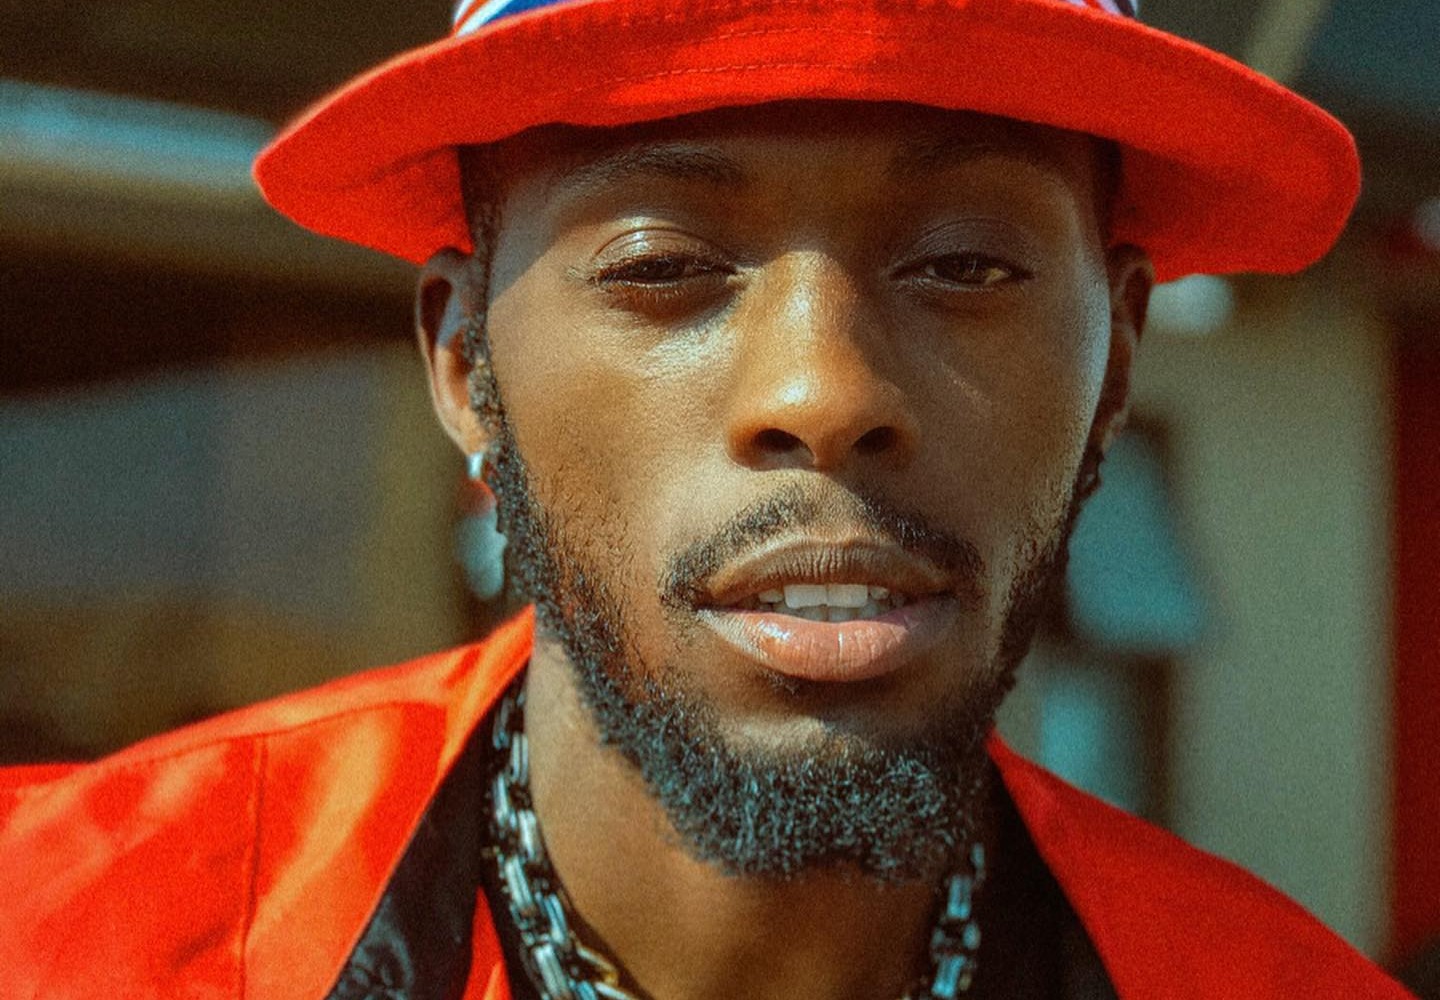 Rapper Takura's Journey Through Darkness and Back - From Despair to Hope!